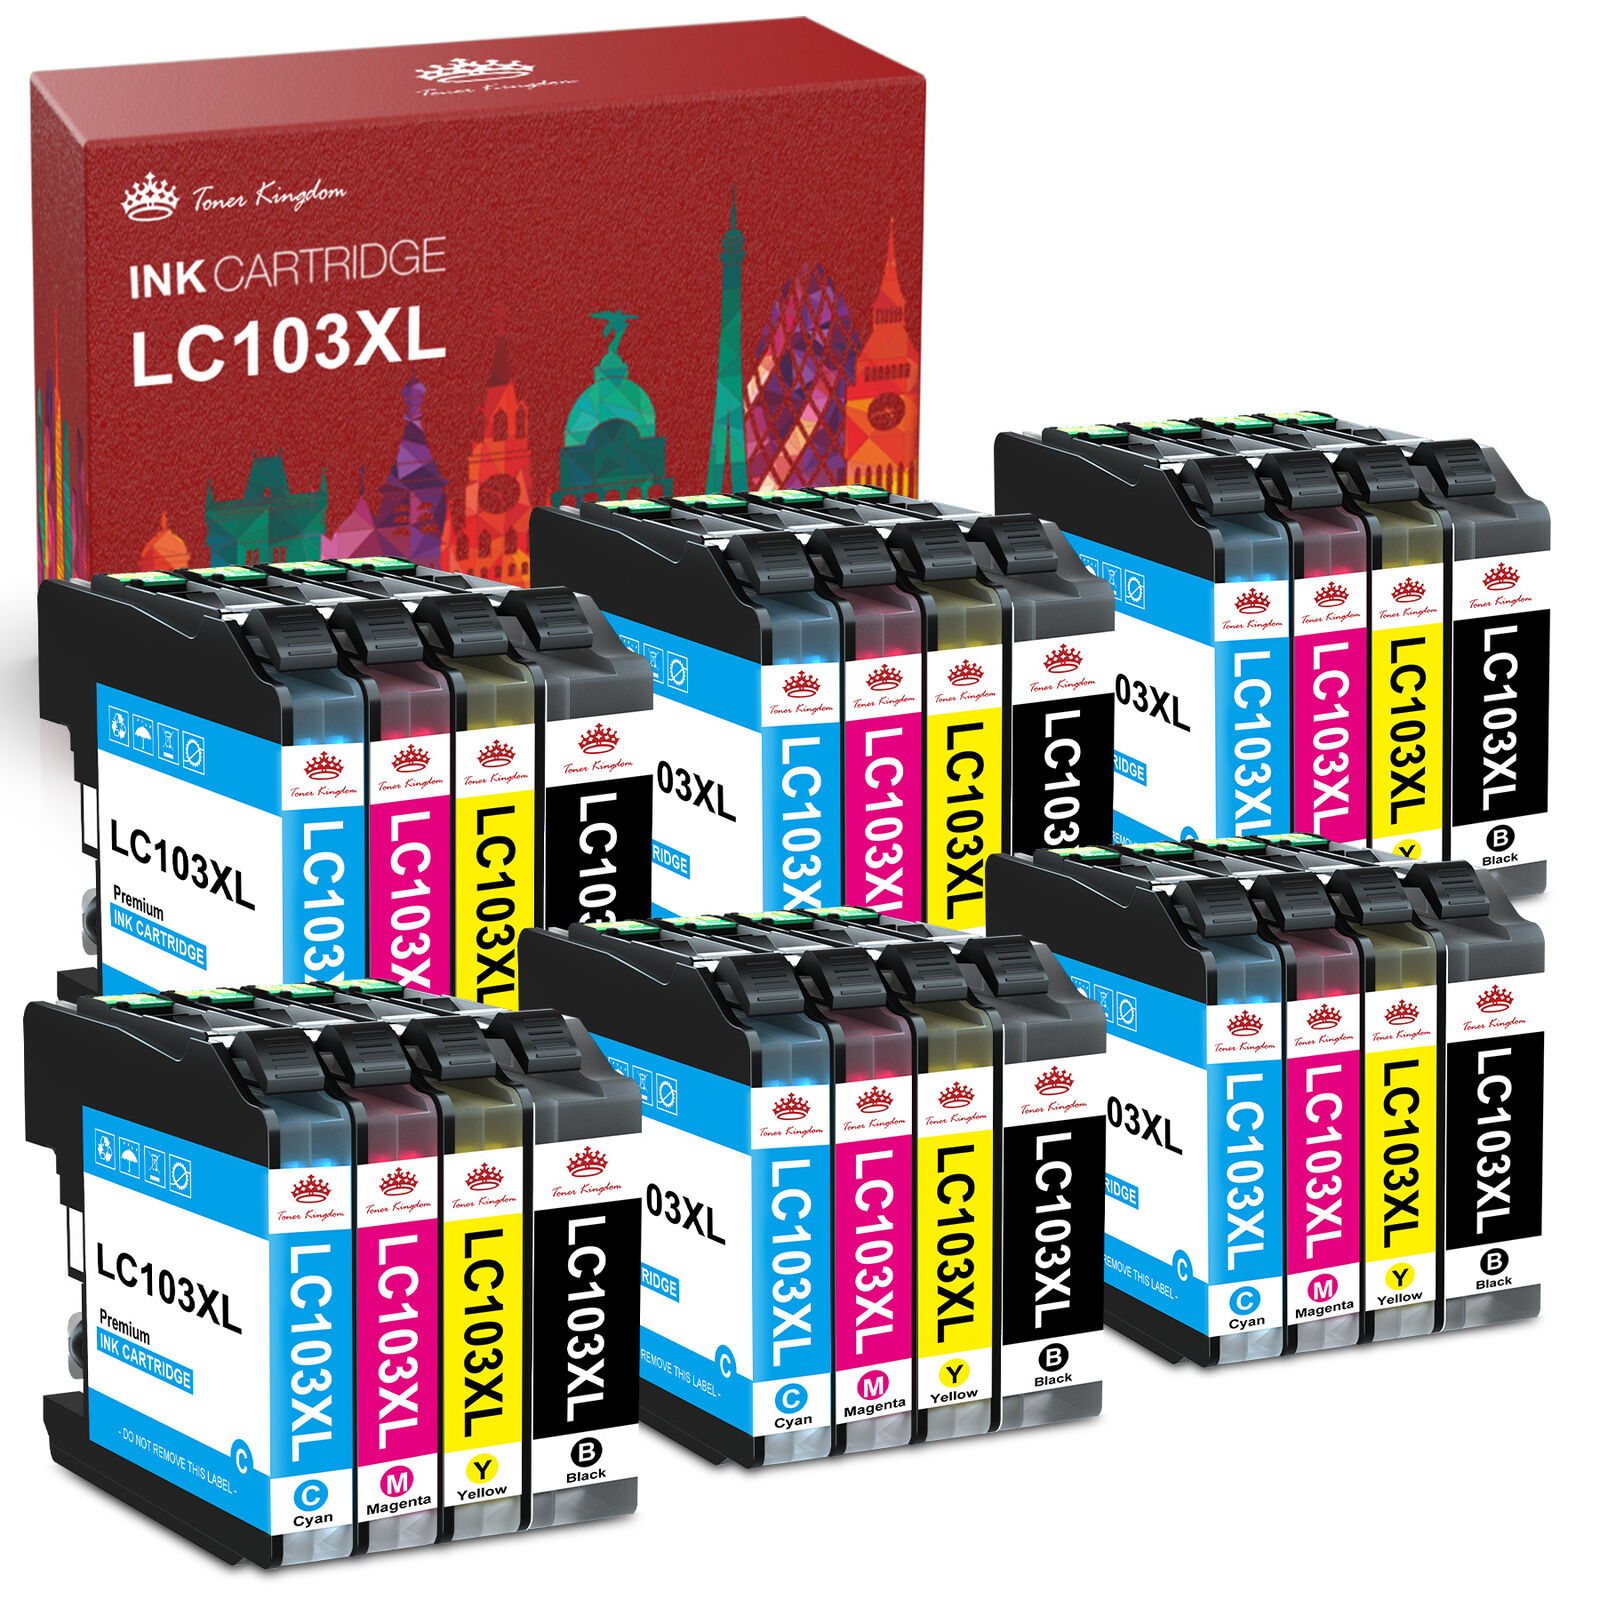 24 PK LC103XL LC-103 Ink Cartridge For Brother MFC-J870DW MFC-J470DW MFC-J475DW